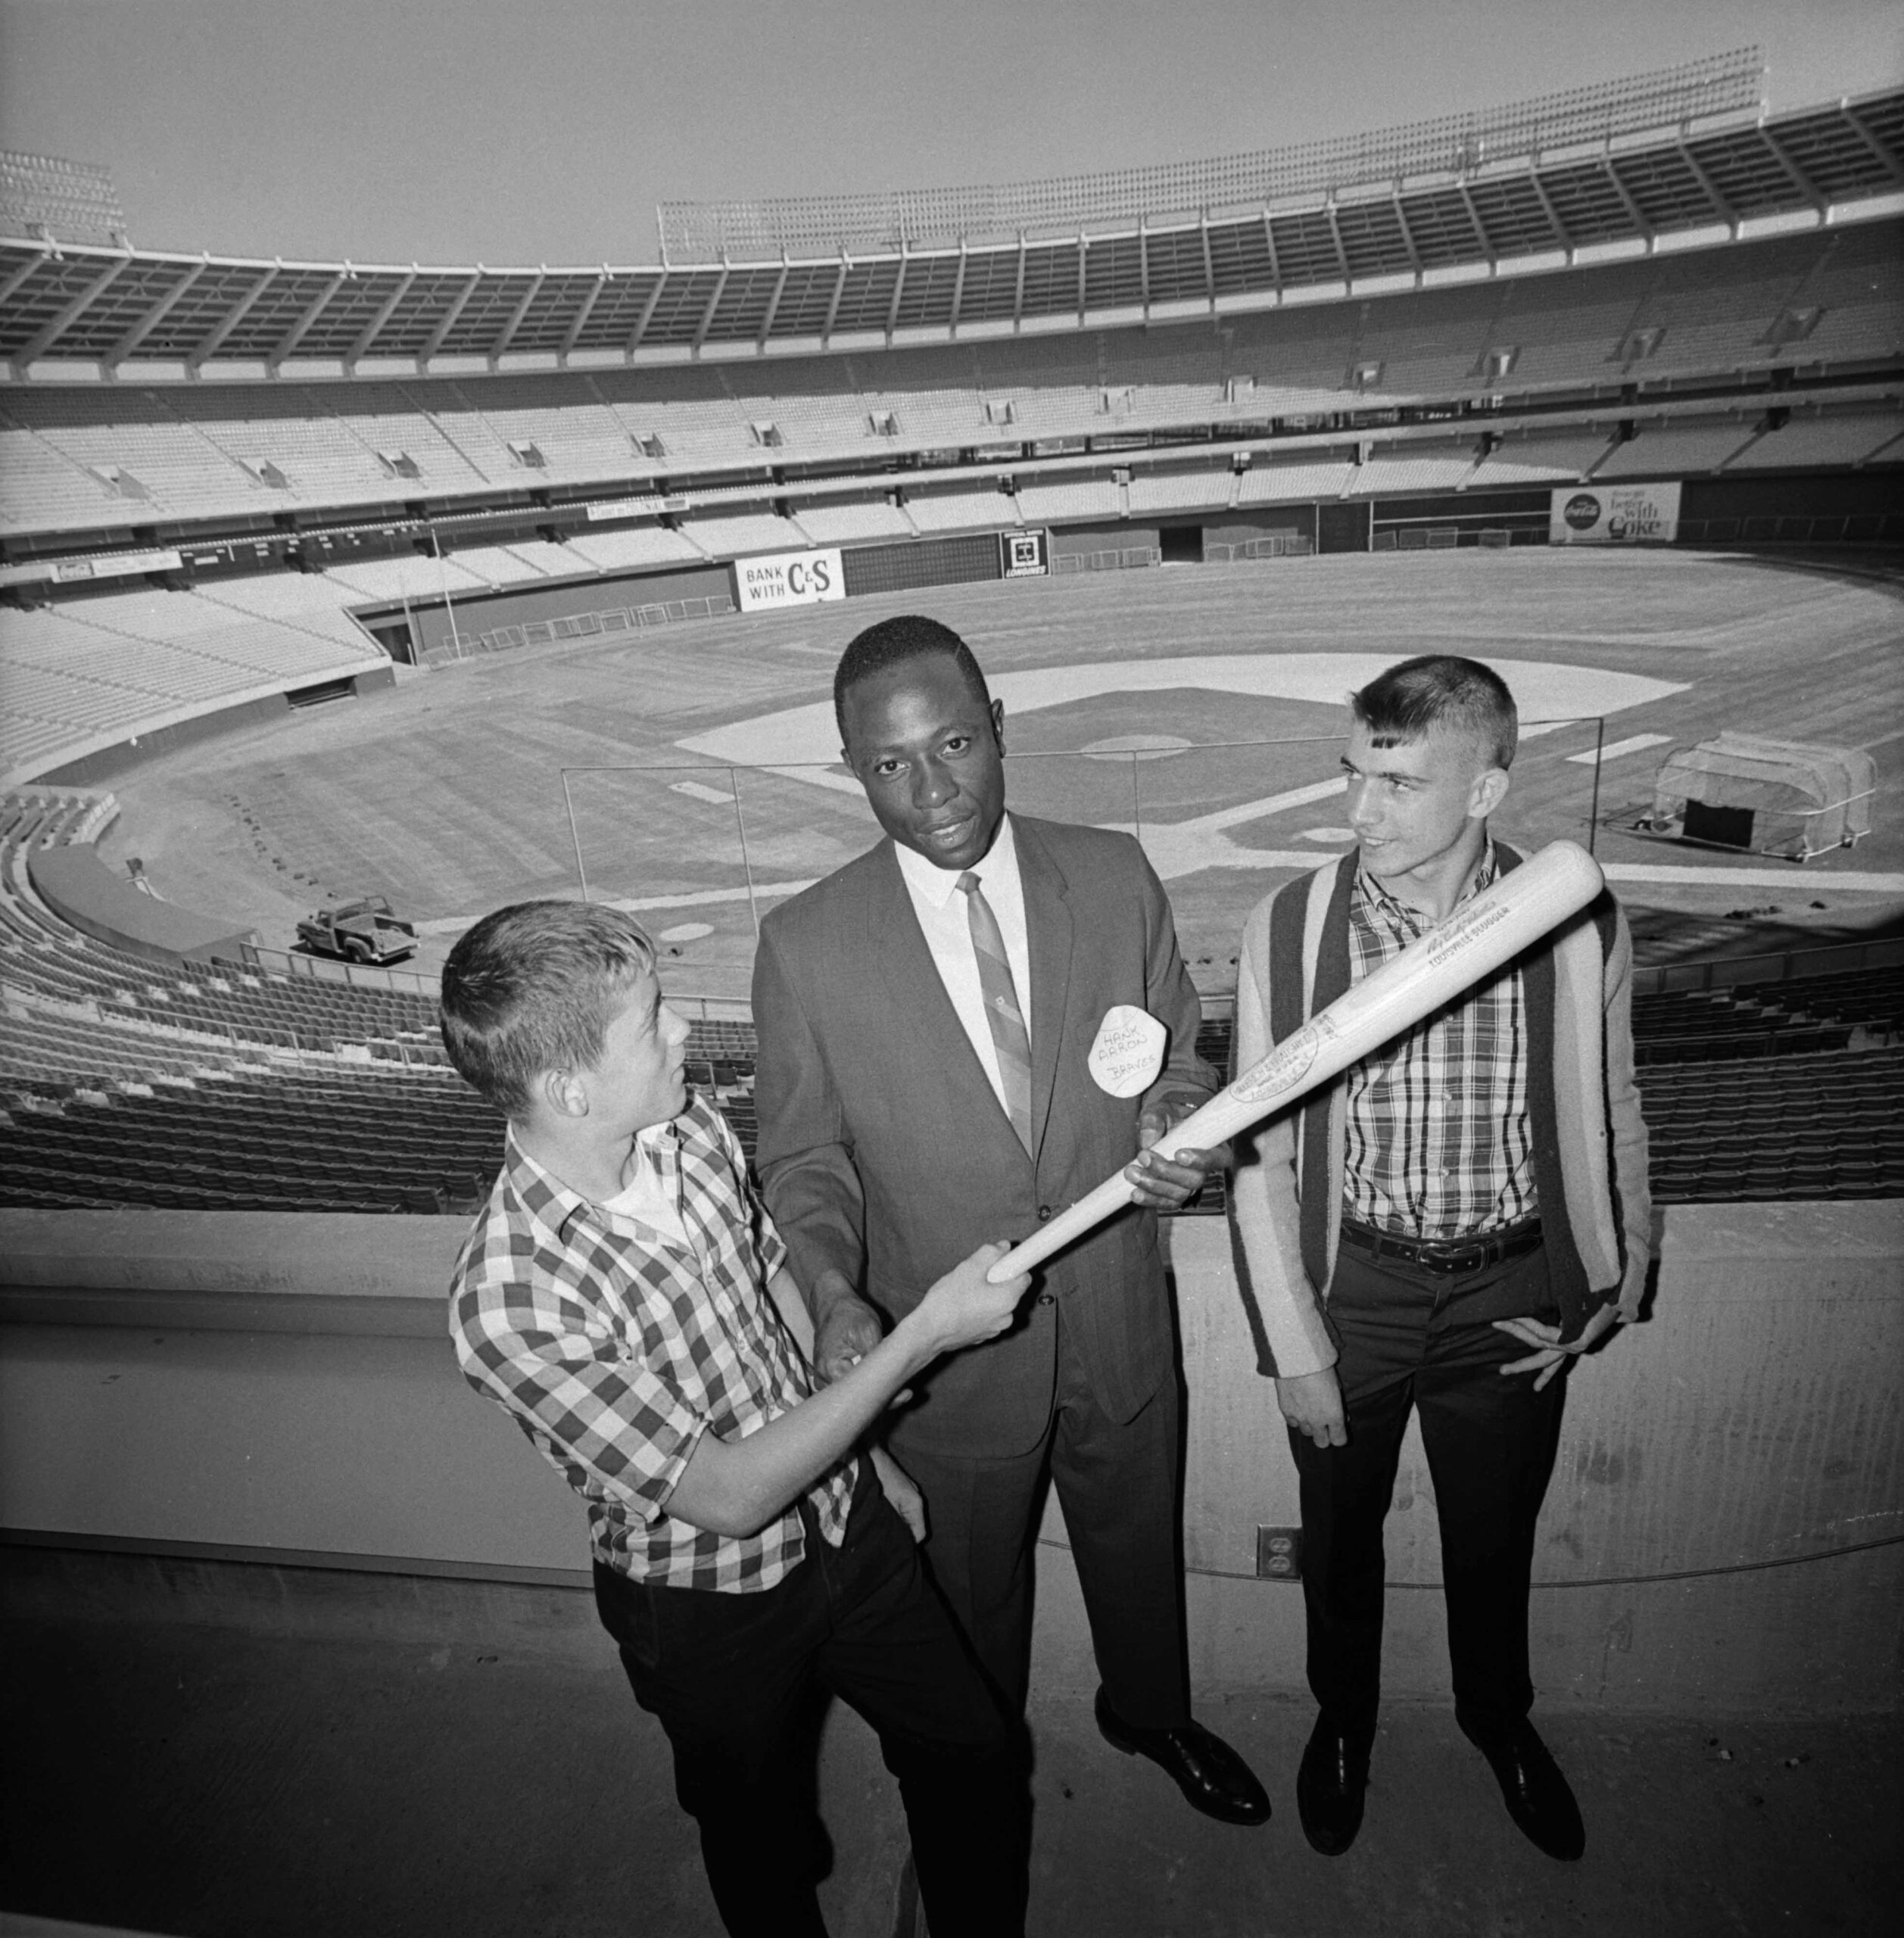 What to Teach Your Kids About Hank Aaron